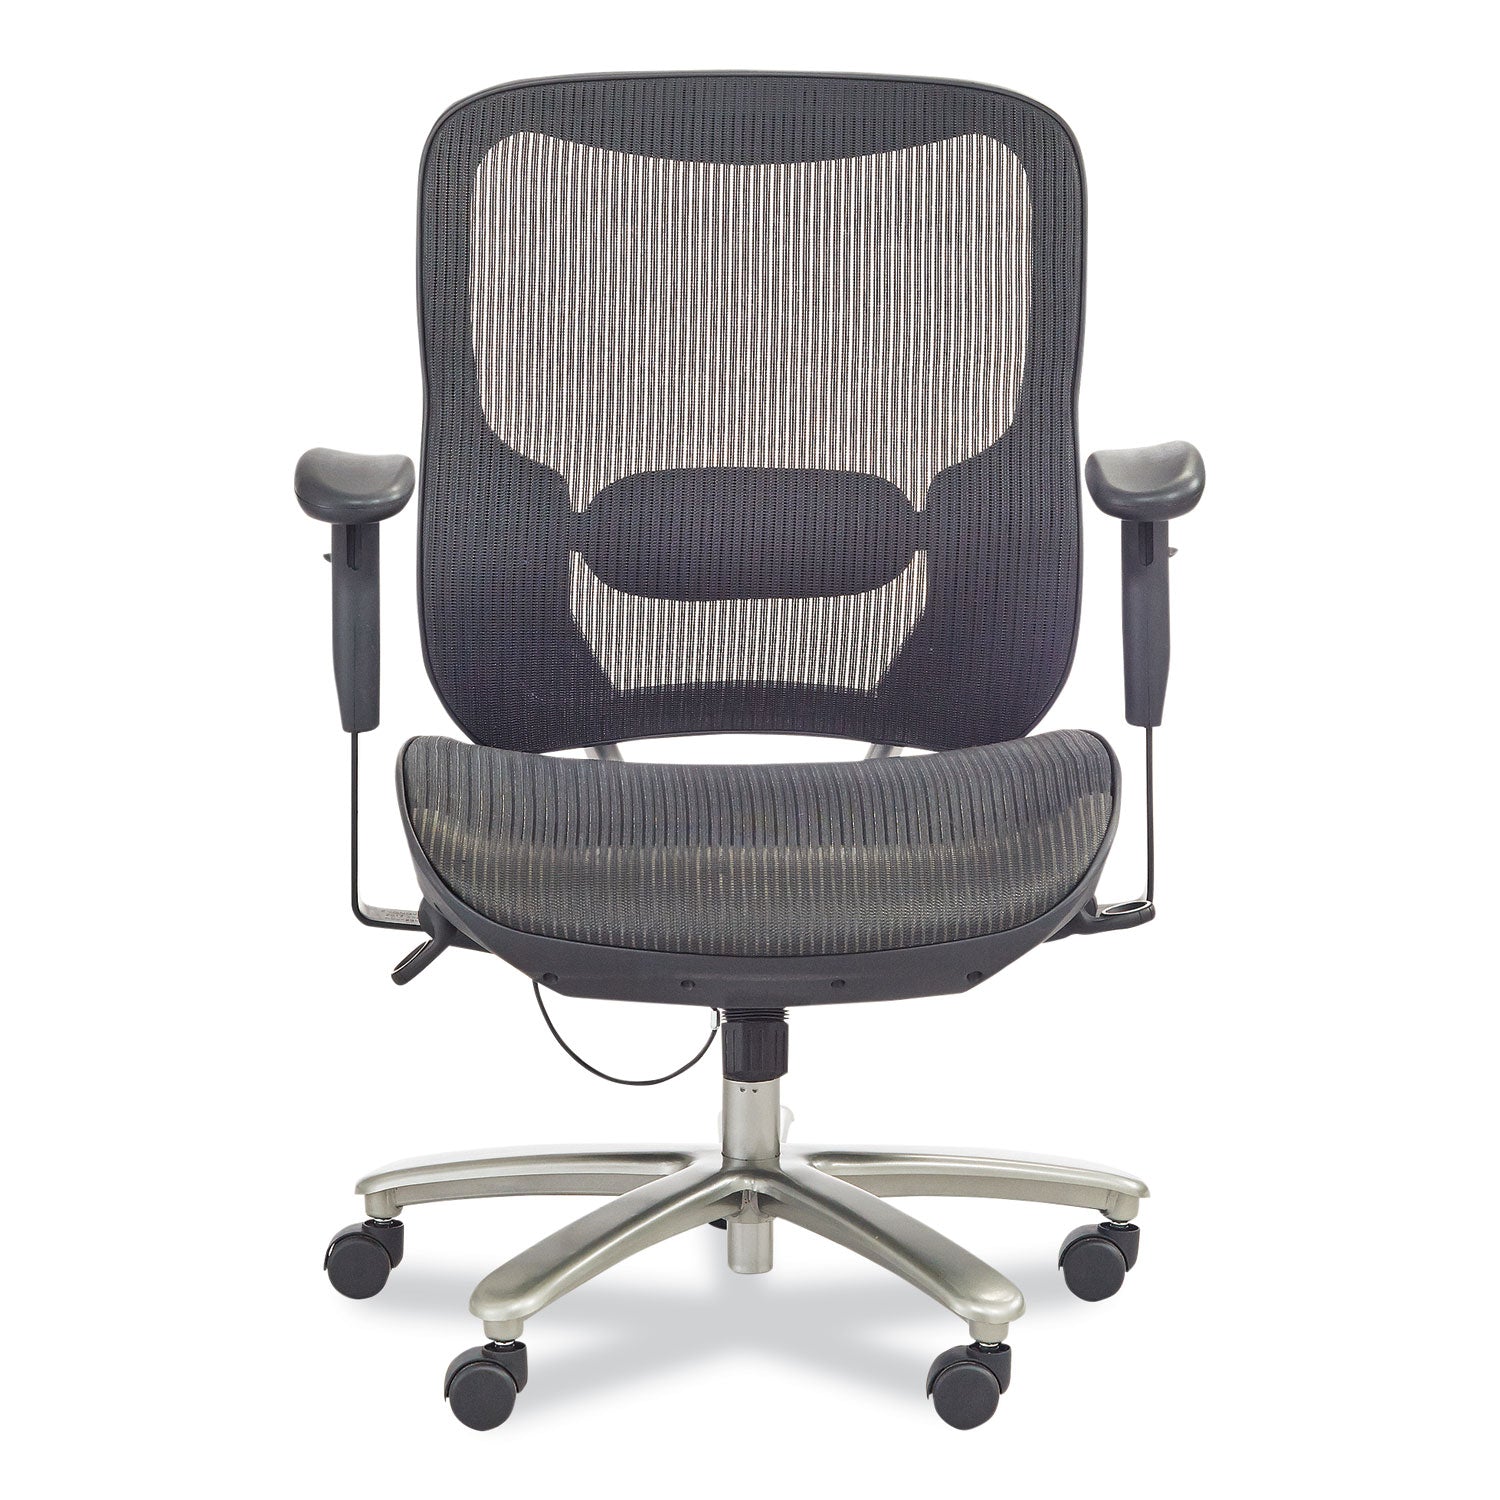 lineage-big-&-tall-all-mesh-task-chair-supports-400lb-195--2325-high-black-seatchrome-baseships-in-1-3-business-days_saf3505bl - 2